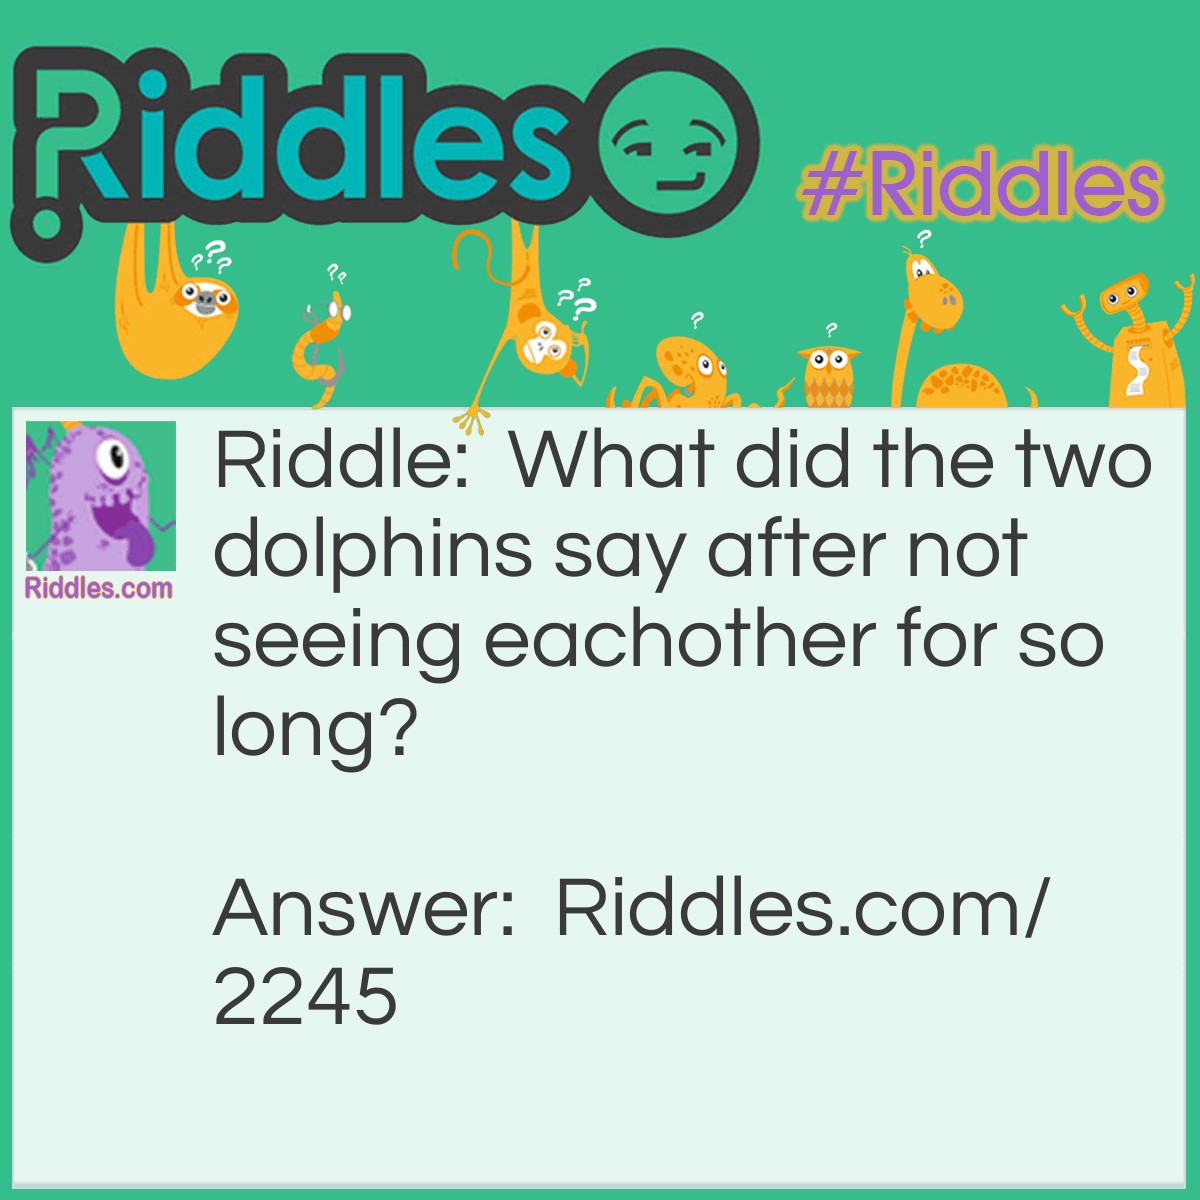 Riddle: What did the two dolphins say after not seeing each other for so long? Answer: "Long time no sea."